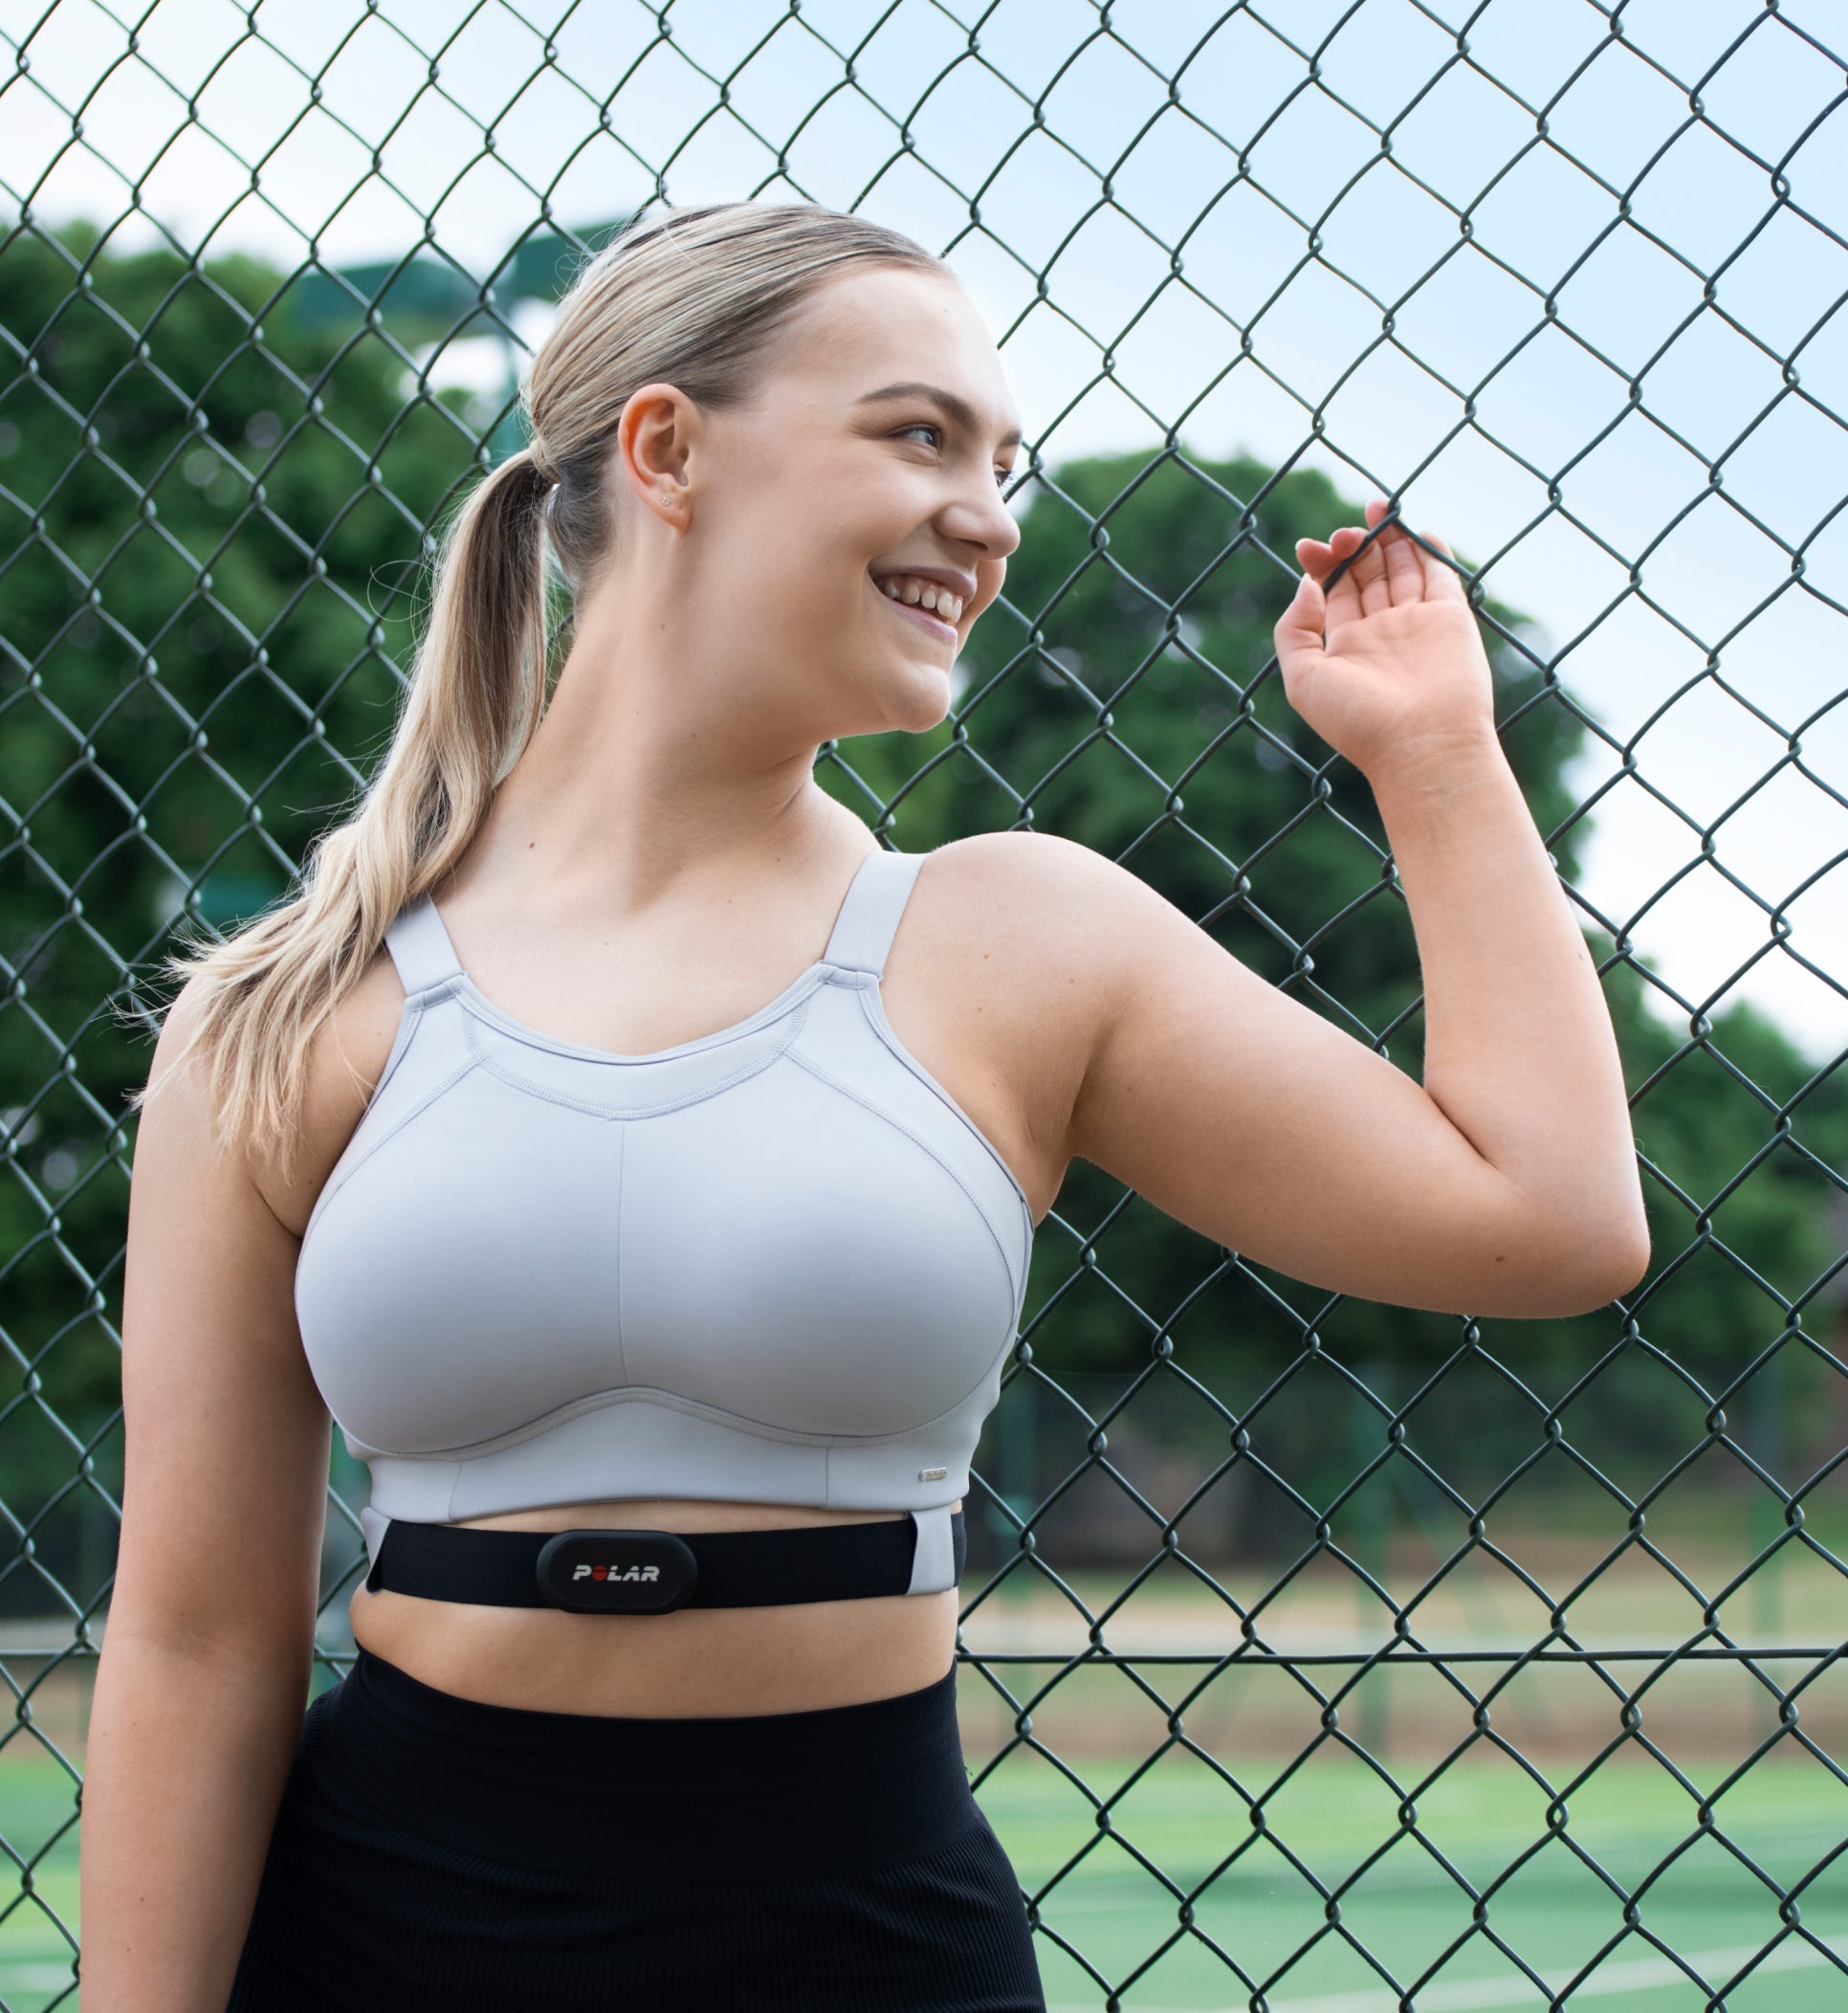 Coobie Seamless Bras - 7 SIGNS YOU'RE WEARING THE WRONG SPORTS BRA🧐  1️⃣Your sports bra feels loose. 2️⃣Your boobs bounce a lot during exercise.  3️⃣The straps dig into your shoulders. 4️⃣You're wearing